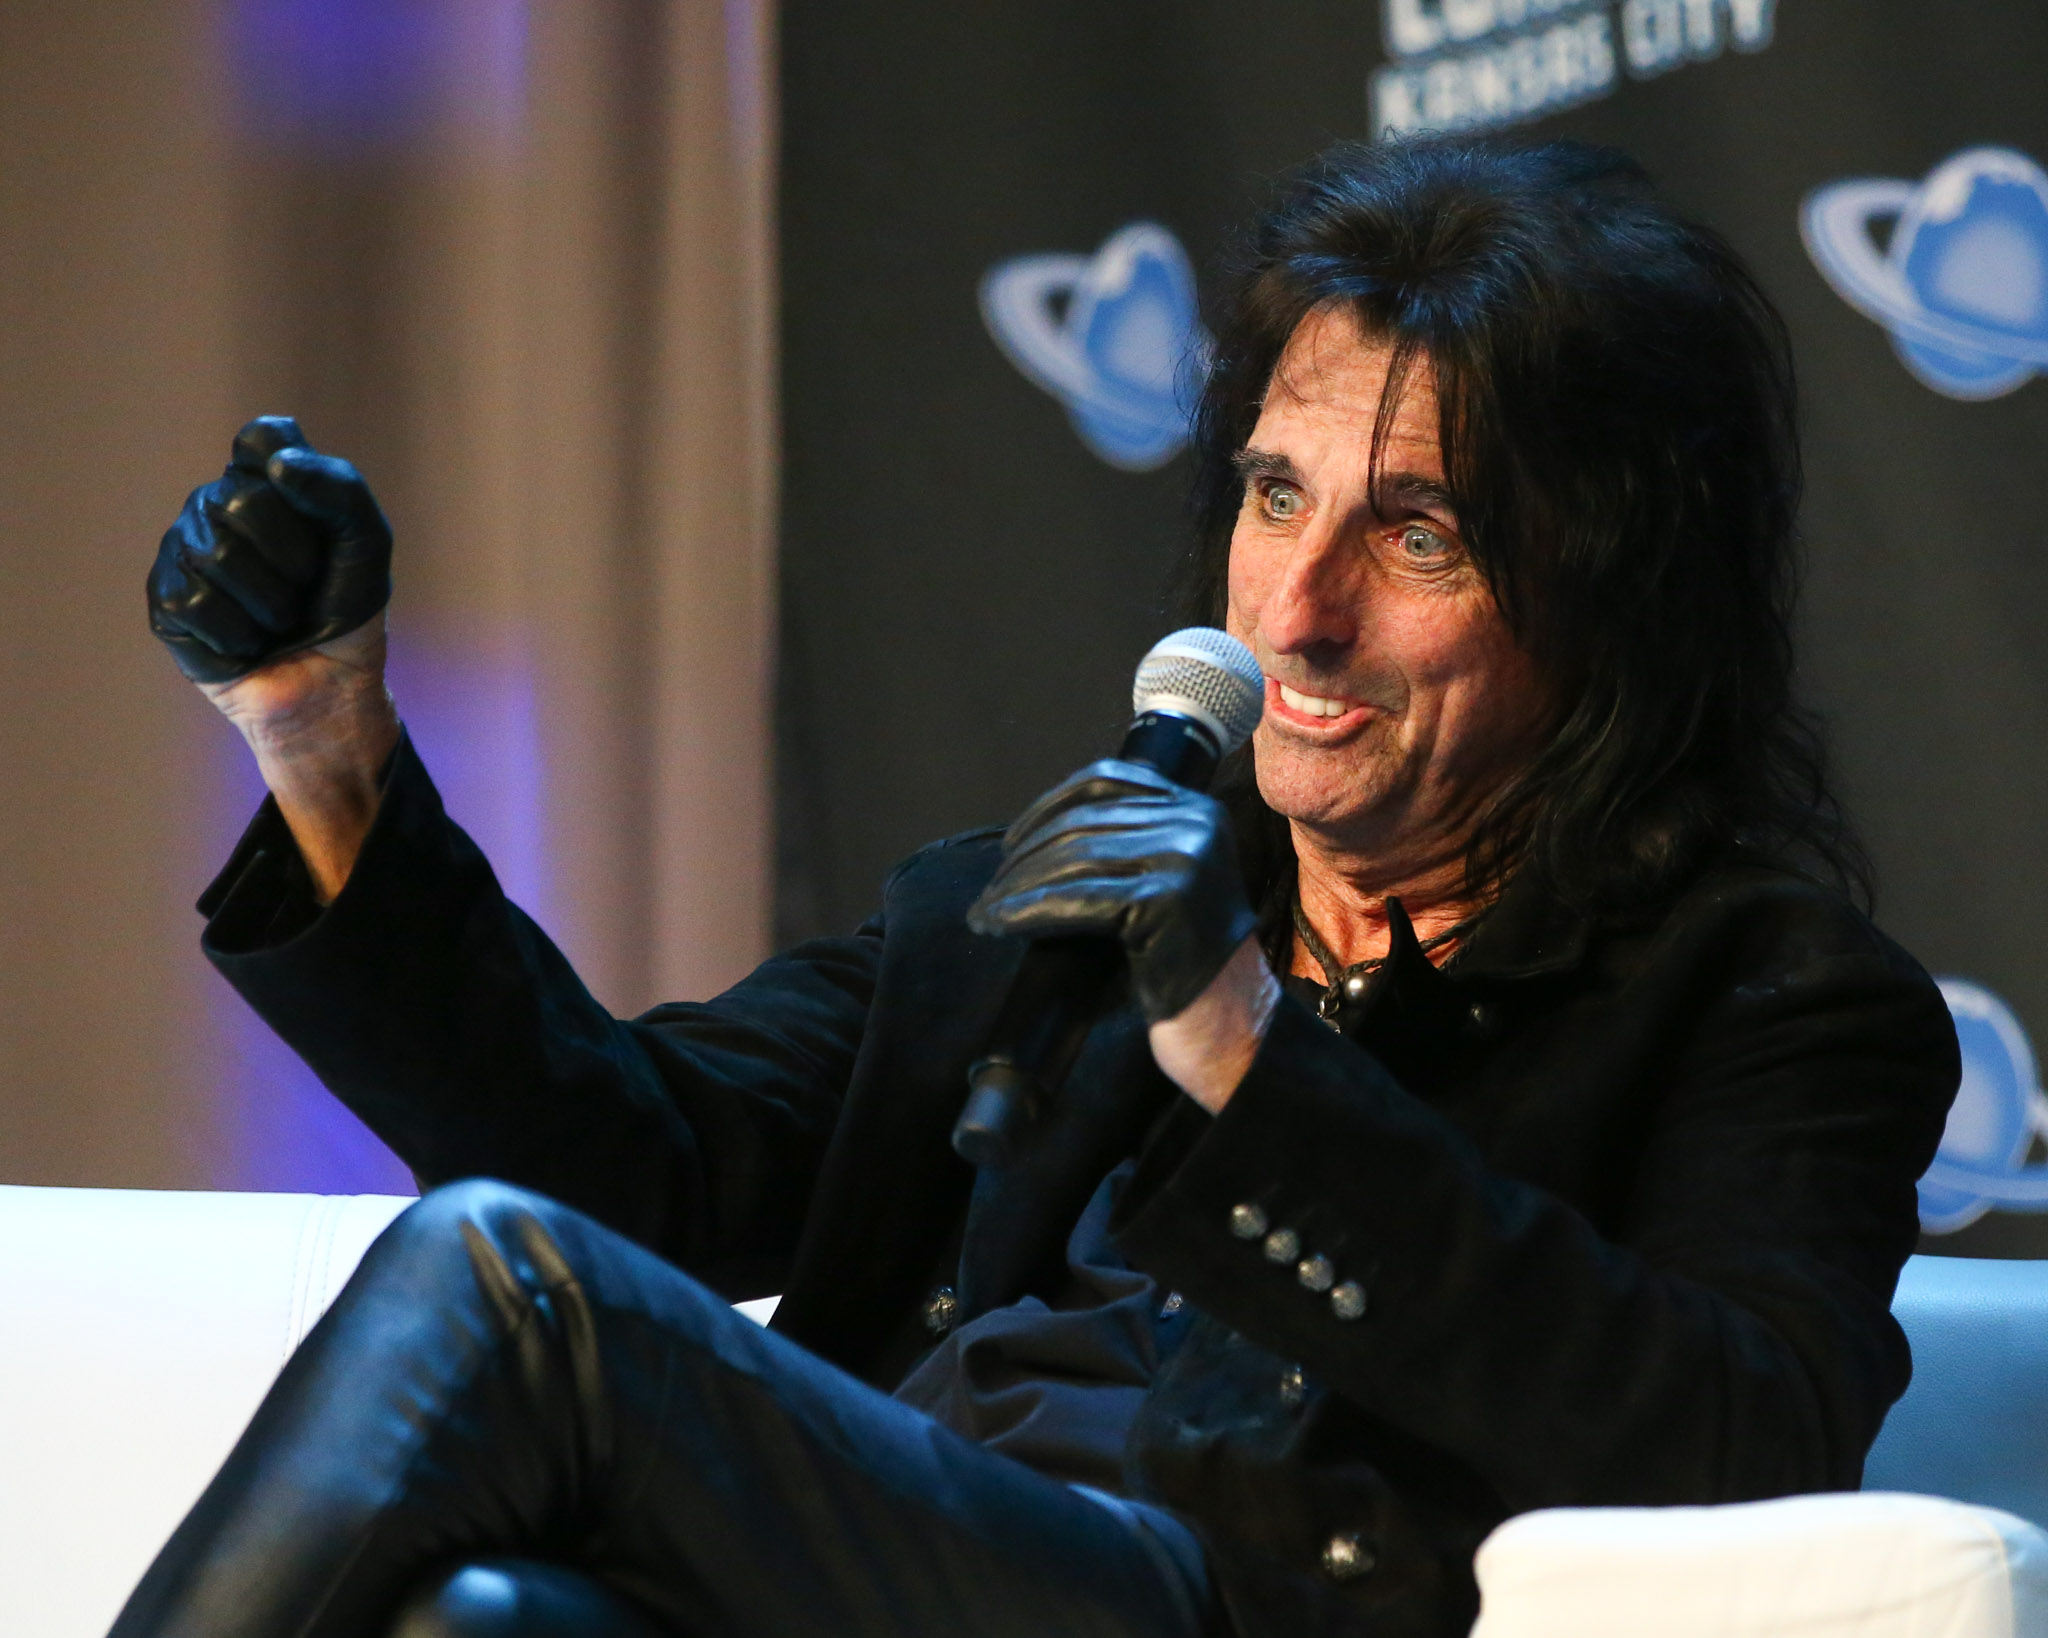 Alice Cooper opens up to fans at Planet Comicon